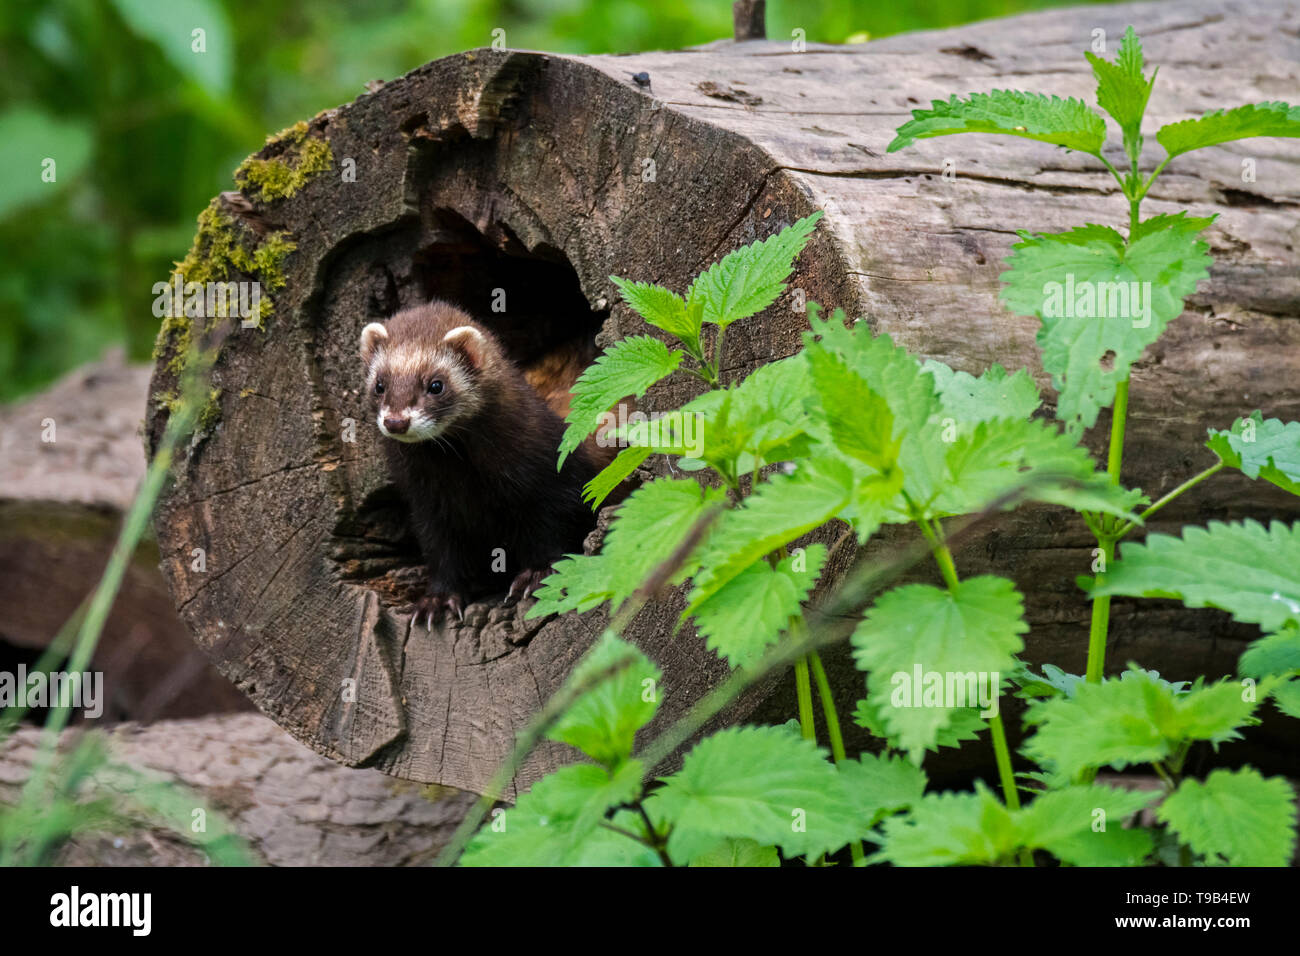 European polecat (Mustela putorius) female emerging from nest in hollow tree trunk in forest Stock Photo